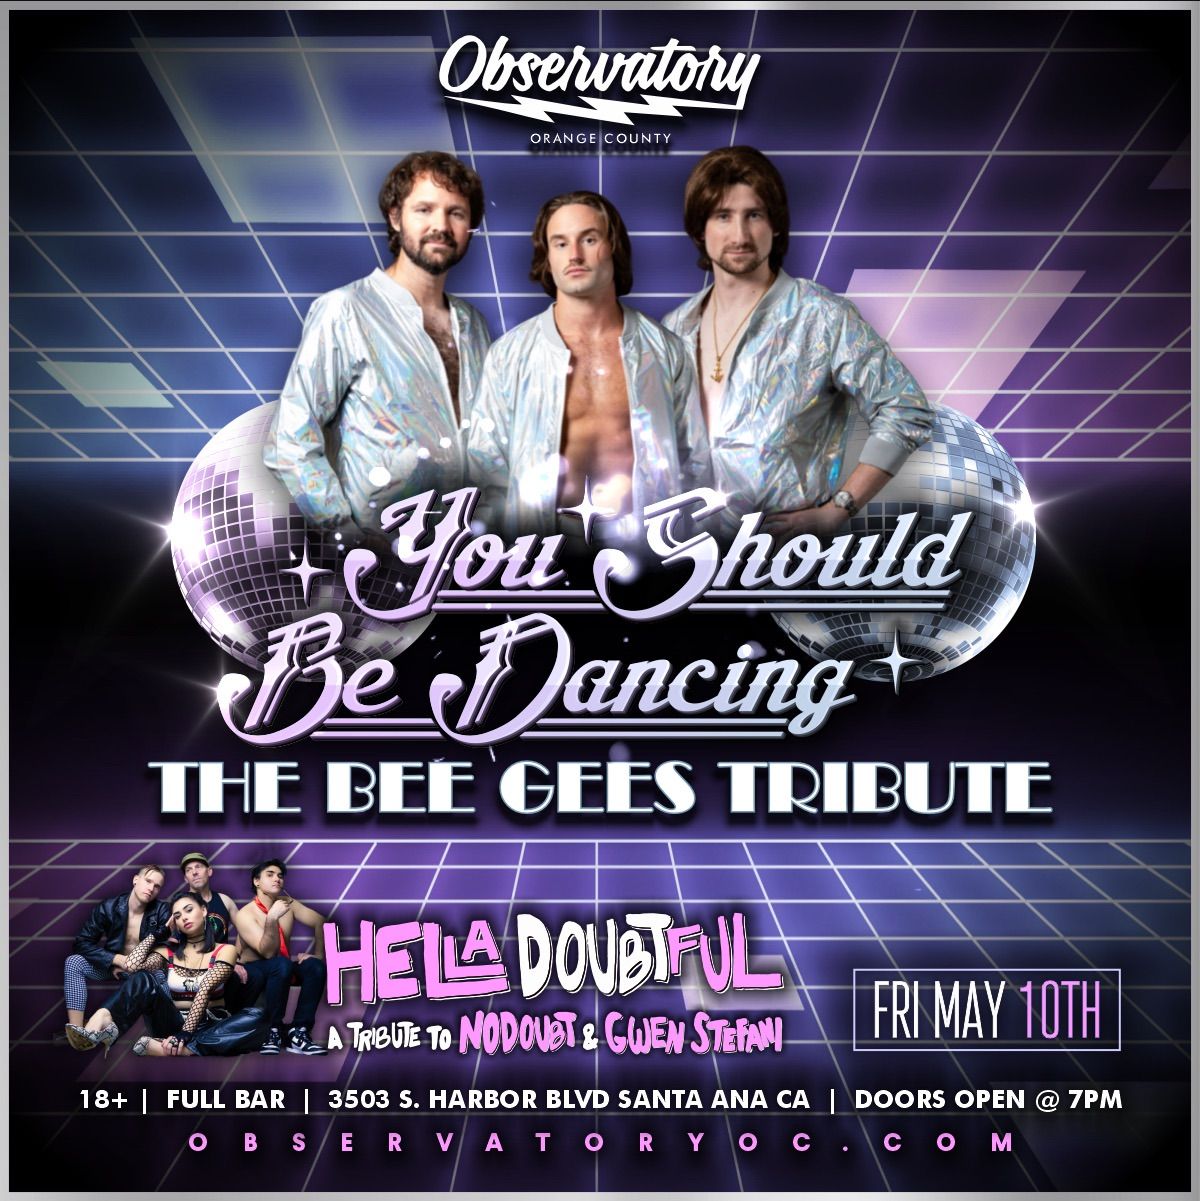 Live in OC - A Tribute to the Bee Gees